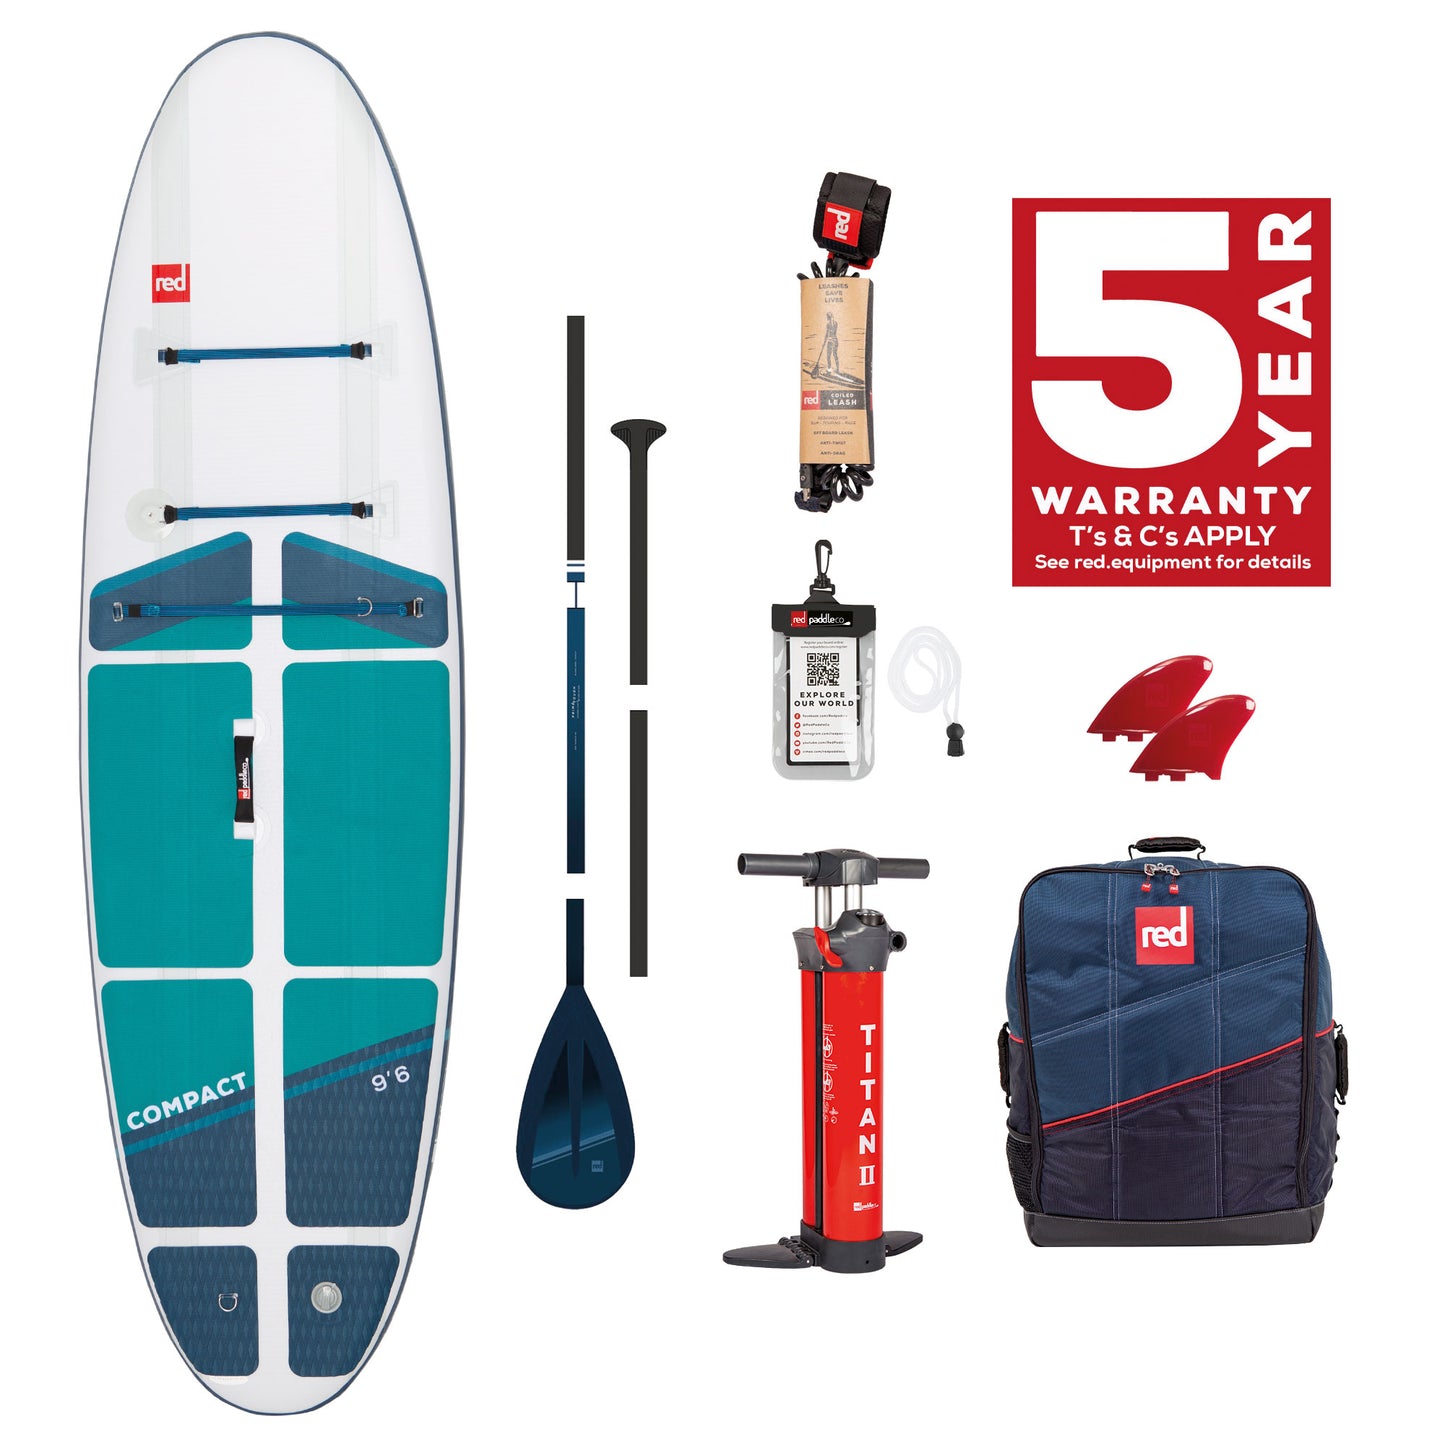 Red Paddle Co - COMPACT 9'6